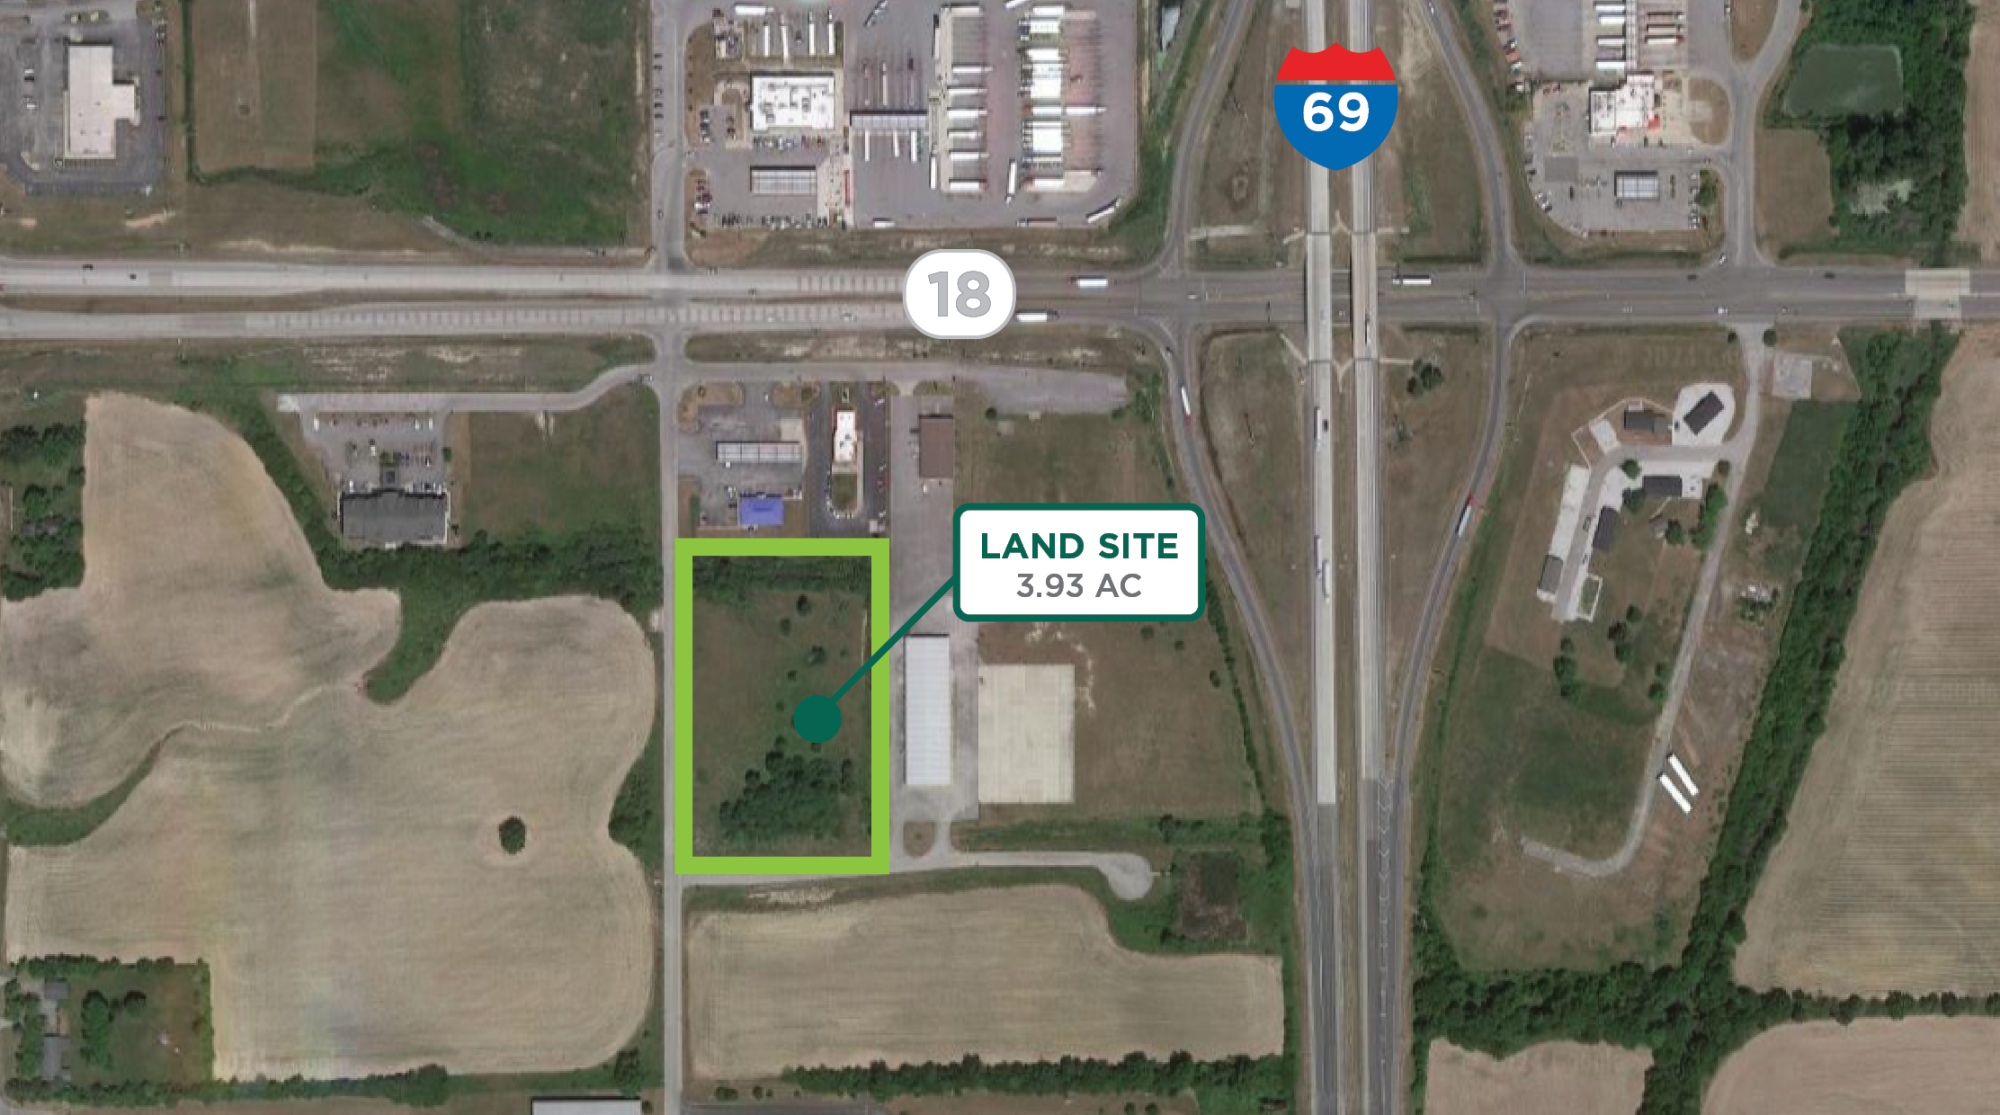 Sturges Property Group - Land For Sale North Central Indiana Marion Land 